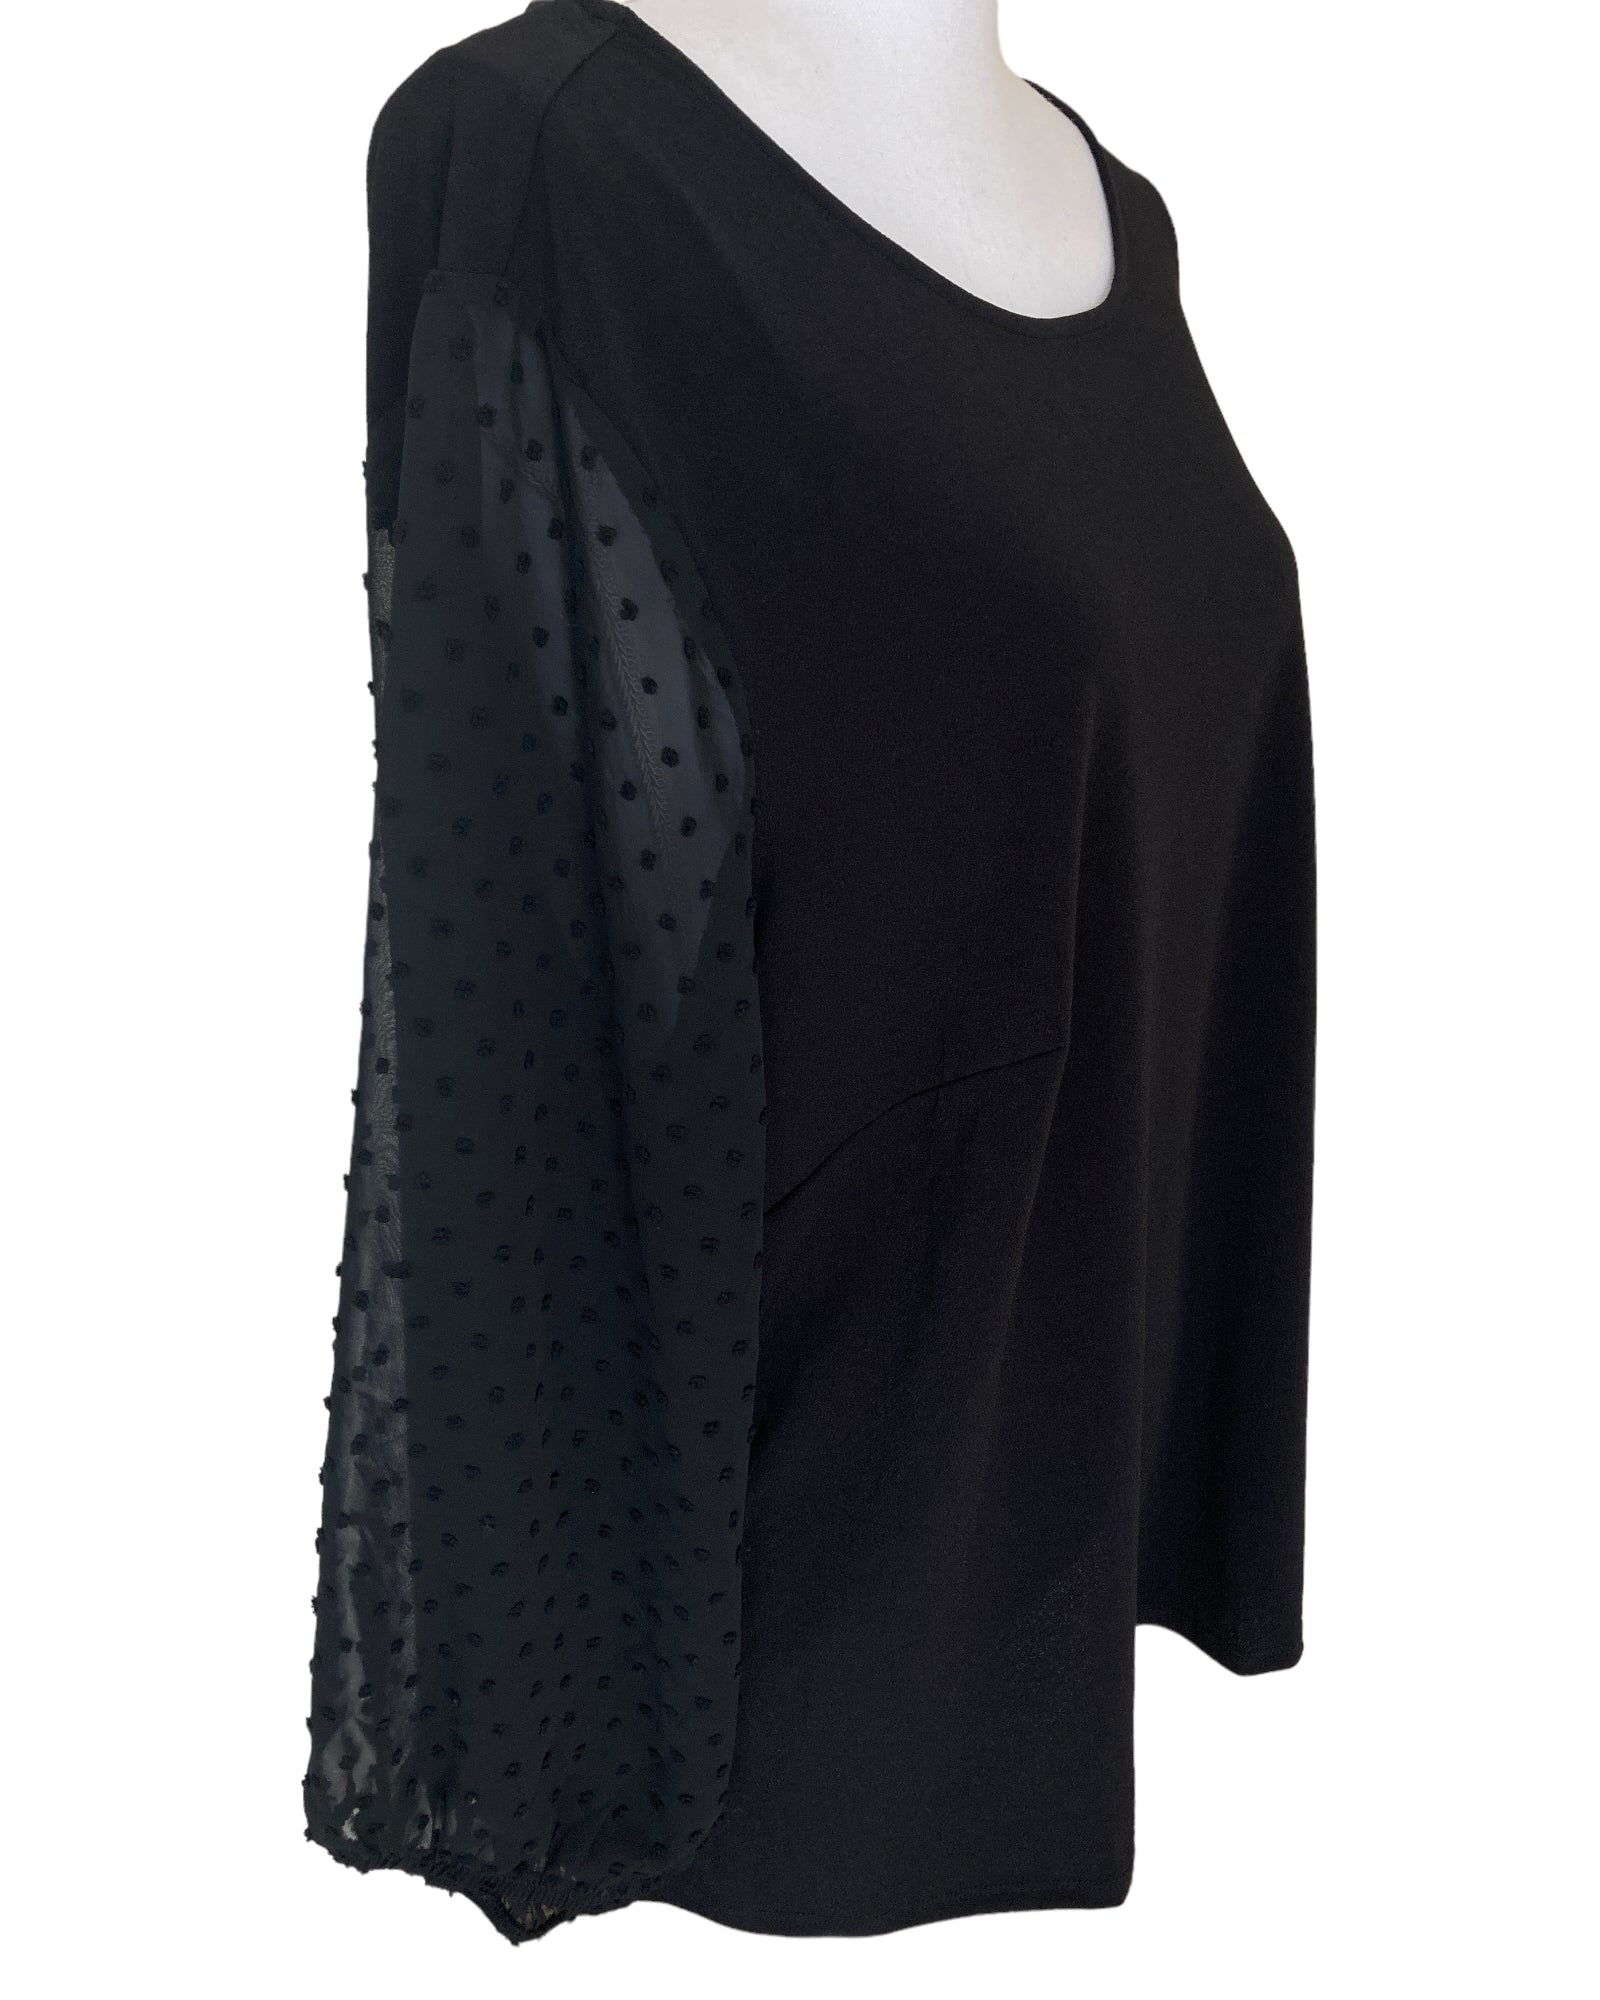 Adrianna Papell Black Blouse with Sheer Sleeves, 3X